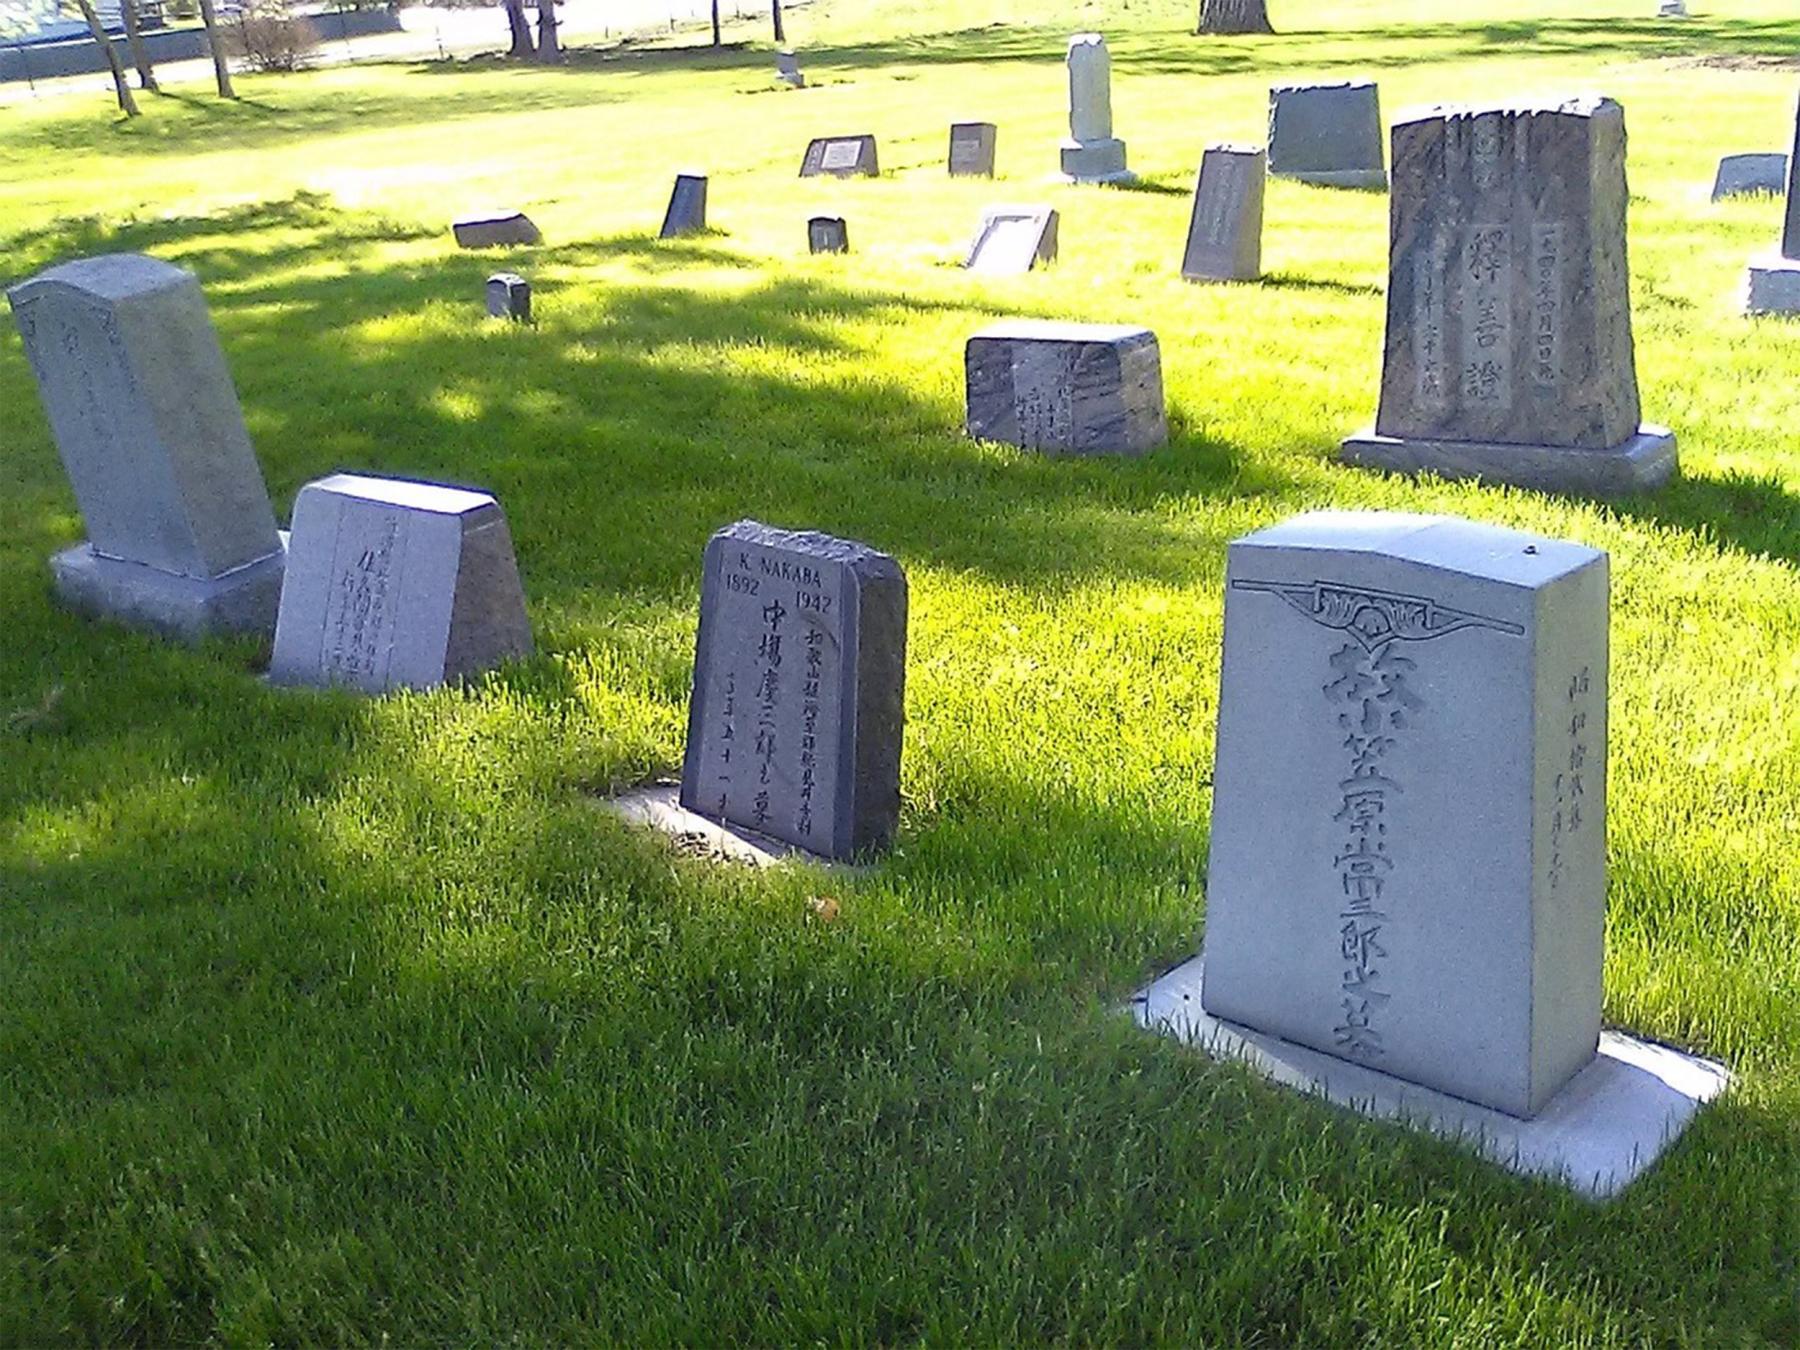 Headstones at Lakeview Cemetery, Cheyenne. Because of their poverty, many of the first generations of Japanese in Cheyenne are buried in unmarked graves in Potter’s Field. If a deceased left behind any assets, his estate paid for the services and the five-dollar interment fee, with the balance dispersed to survivors. S. Yamamoto, for example, died when a locomotive hit him. He left a one-dollar Ingersoll watch and $9.90 in cash. Author photo